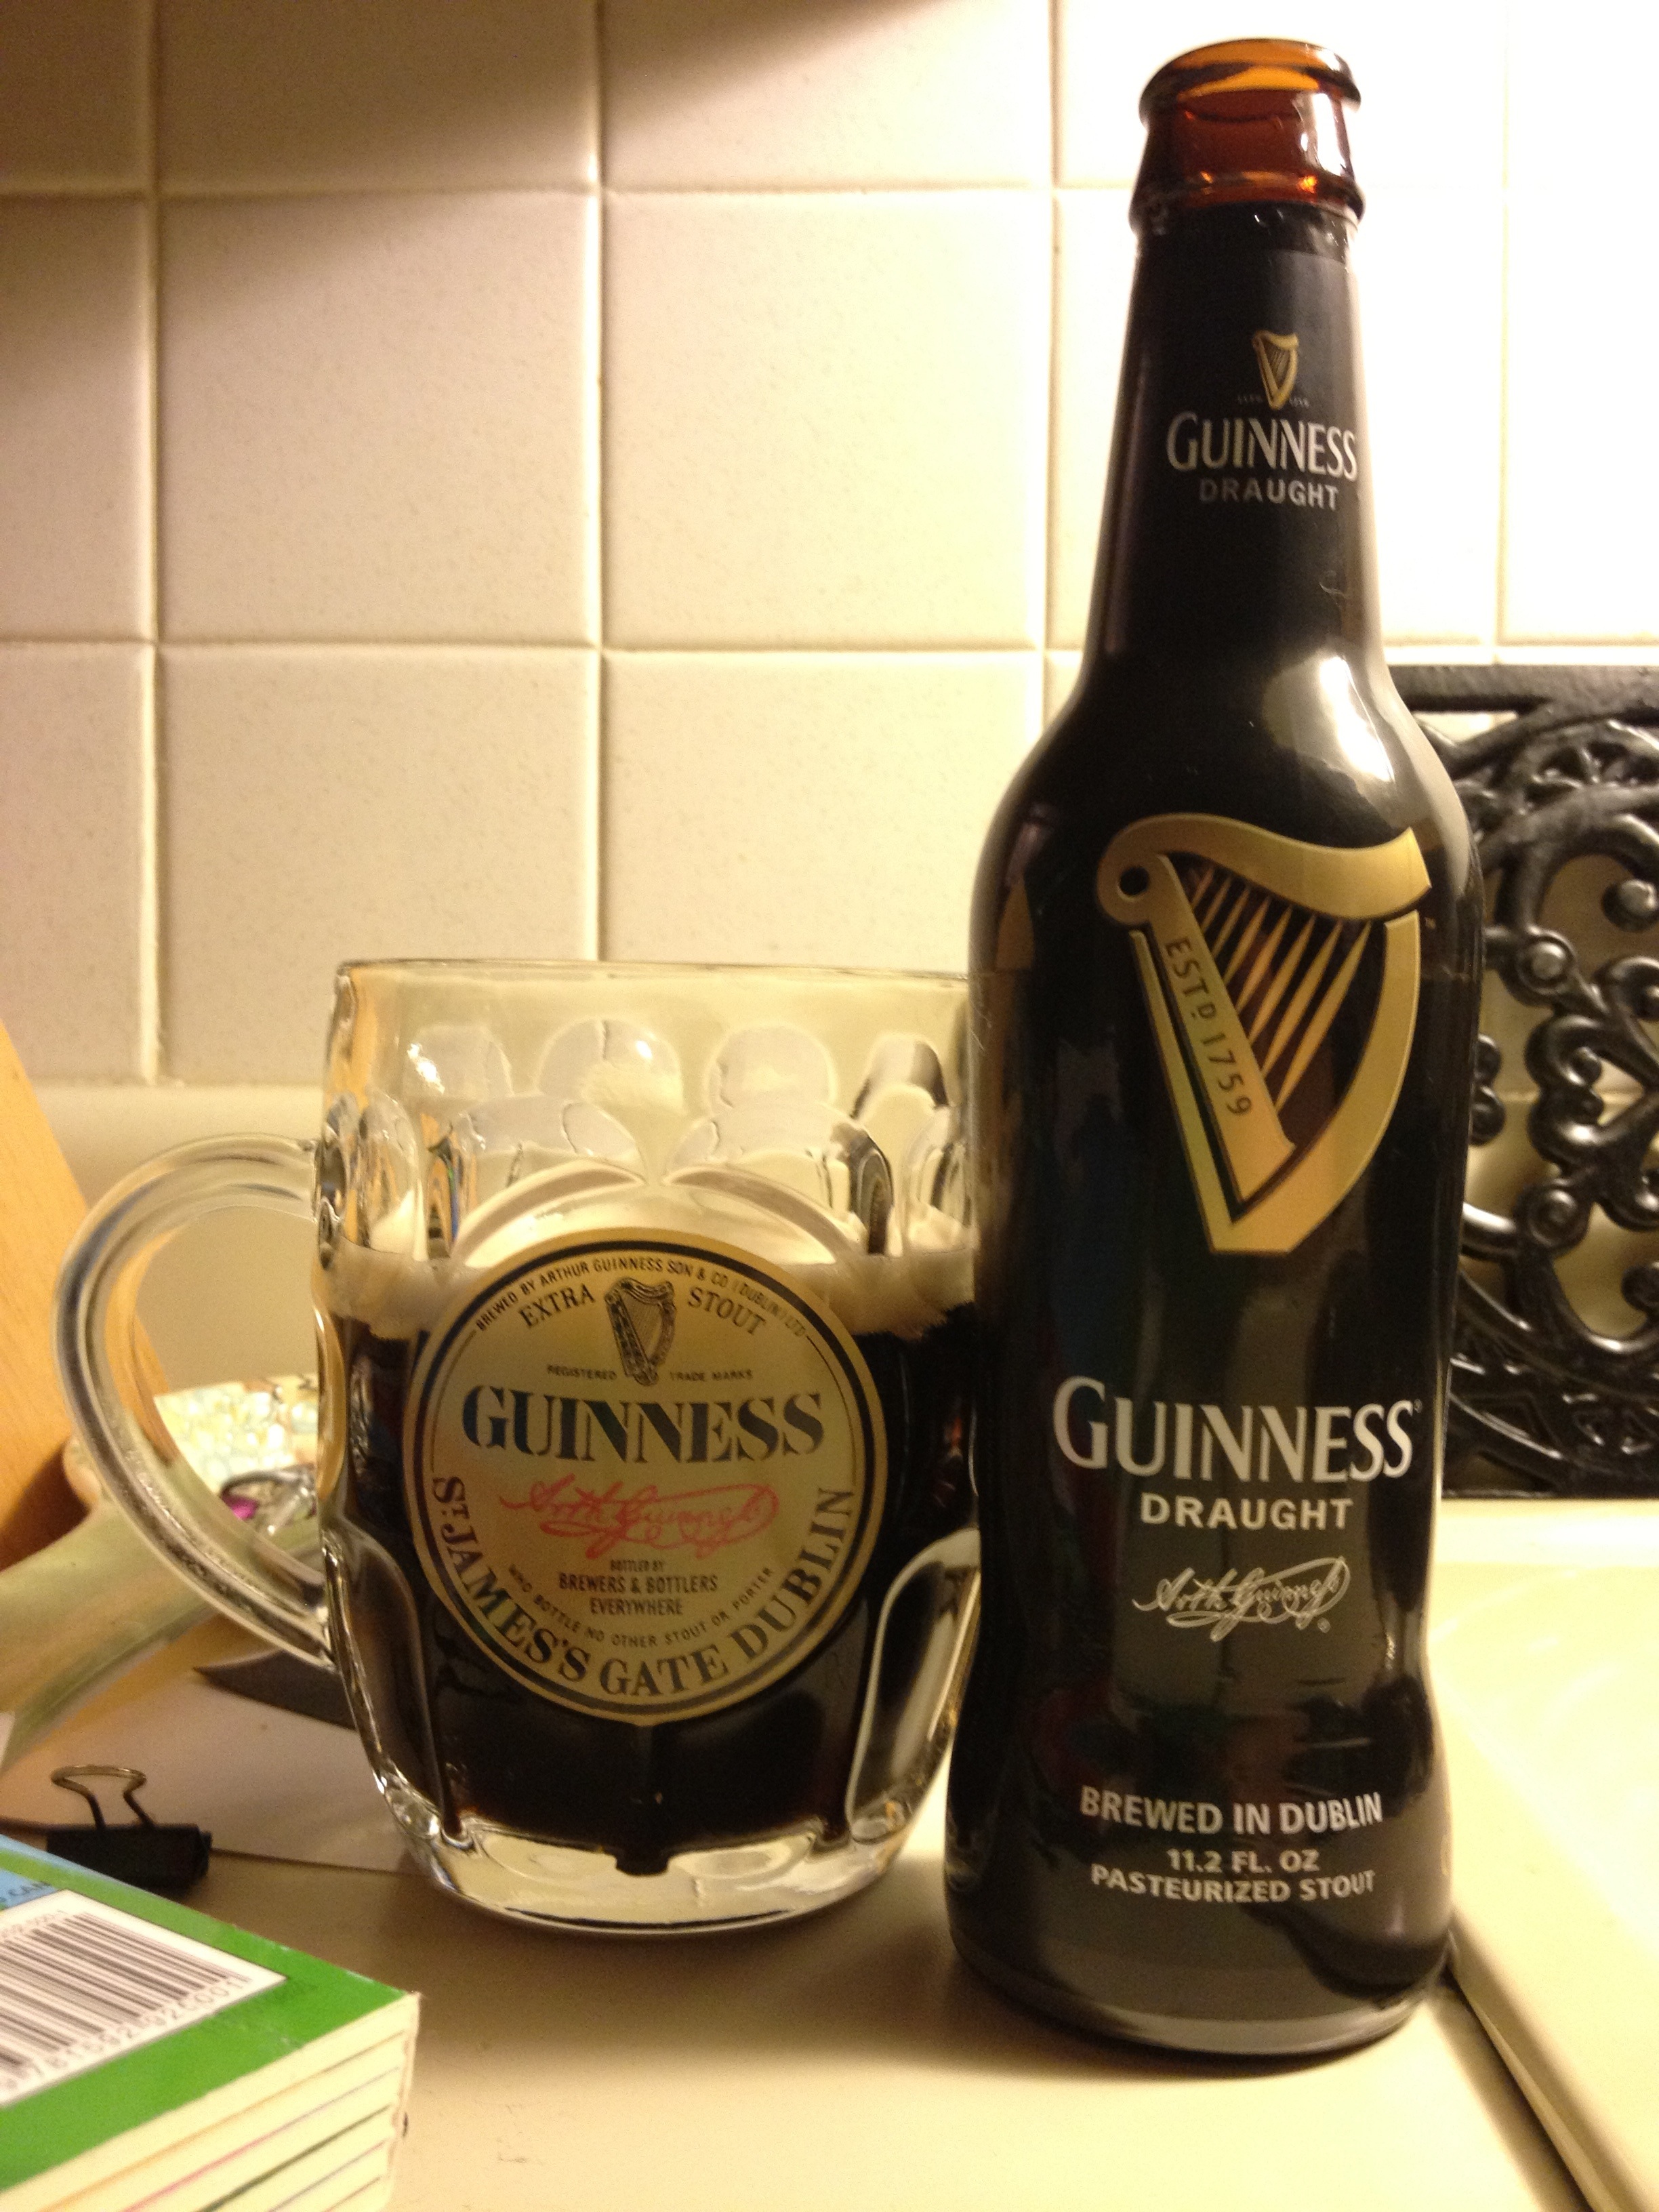 I kind of feel like the Guinness bottle should FILL the official ...